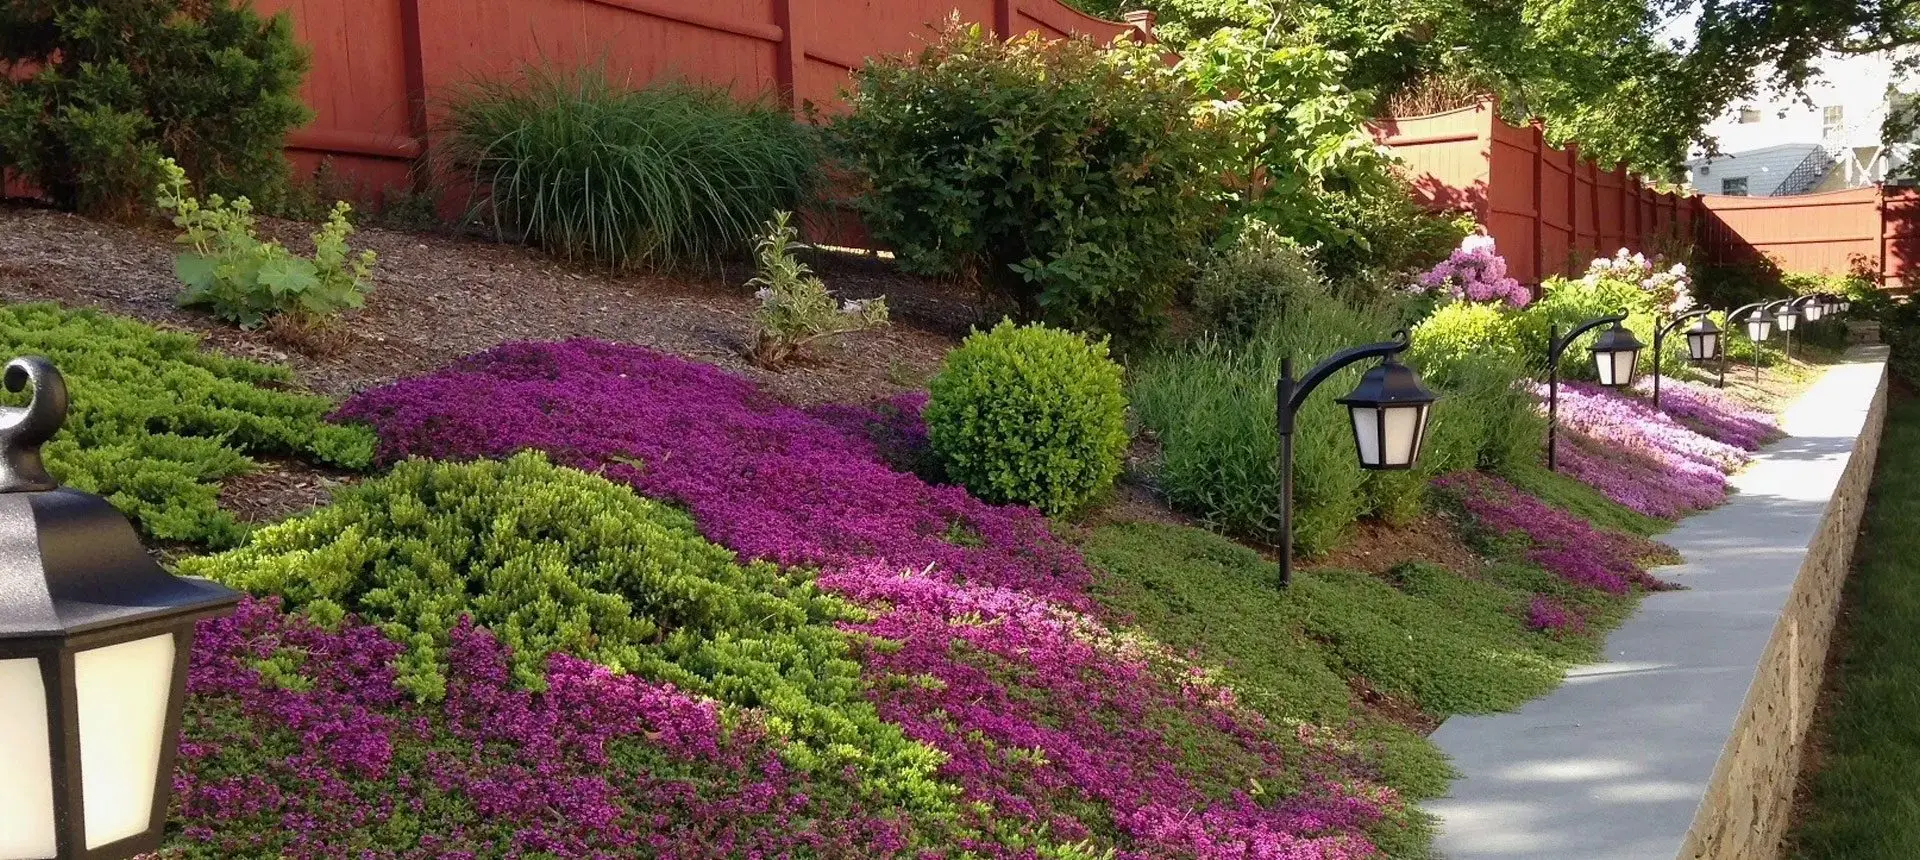 A garden with purple flowers and green grass.